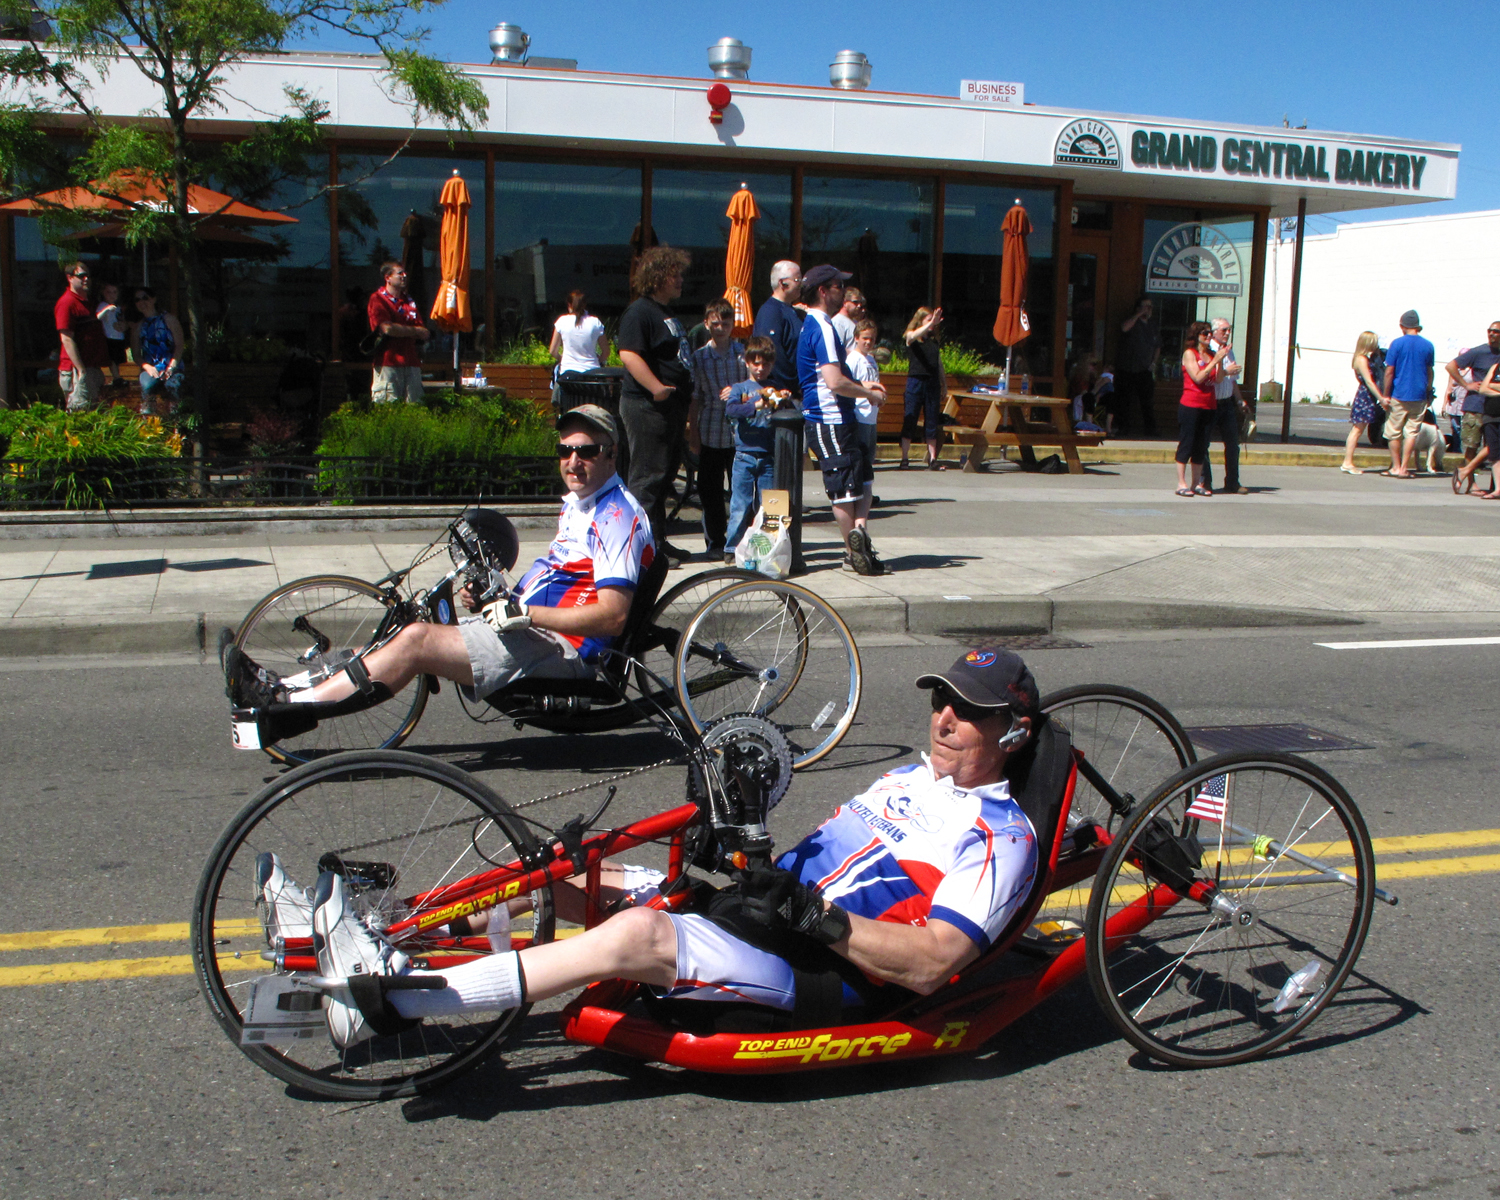 Bikes Will Race Through Burien on the Fourth of July